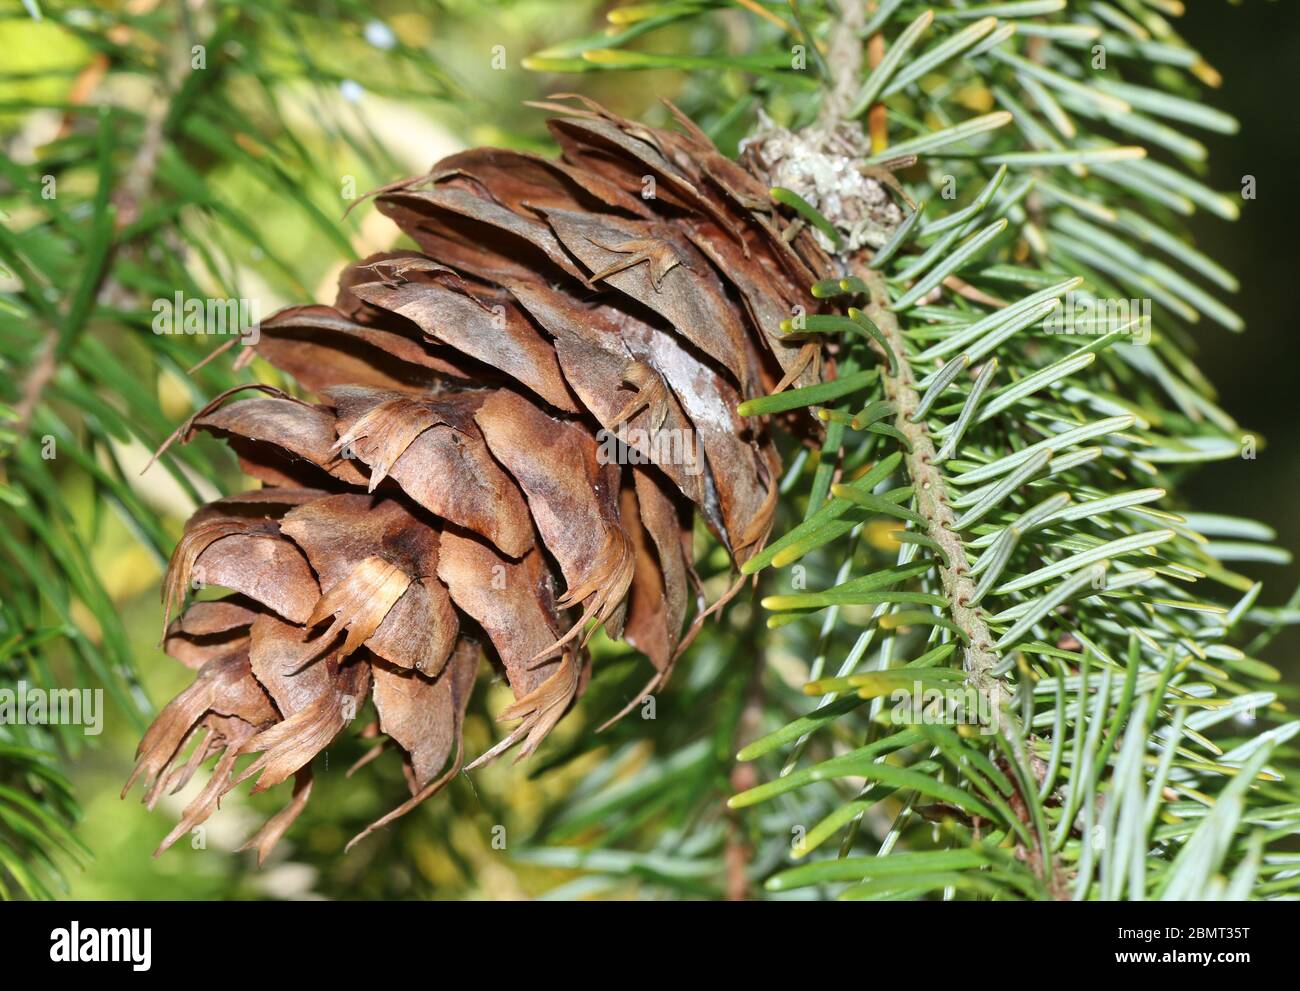 A cone of a Douglas-Fir tree, Pseudotsuga menziesii, growing in woodland in the UK. Stock Photo